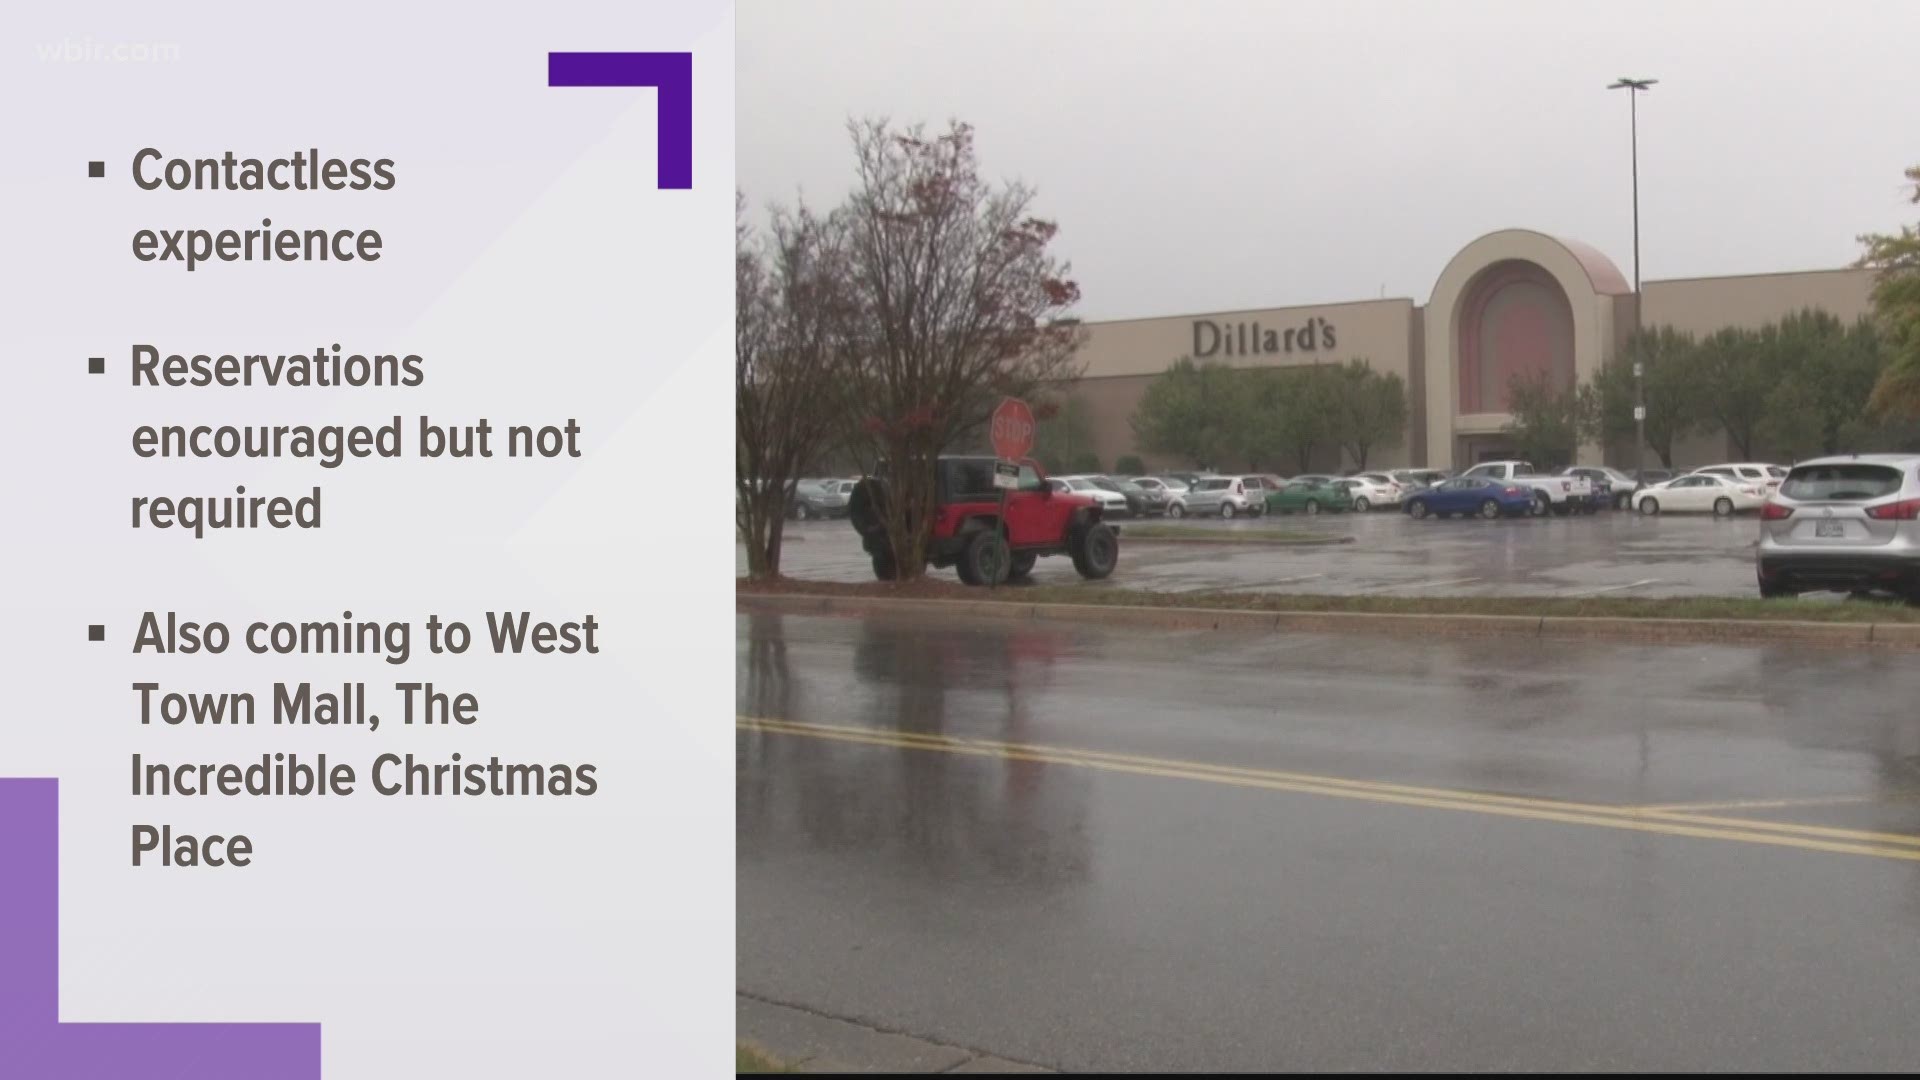 Santa Claus will visit Foothills Mall in Maryville with new safety precautions, due to the COVID-19 pandemic.